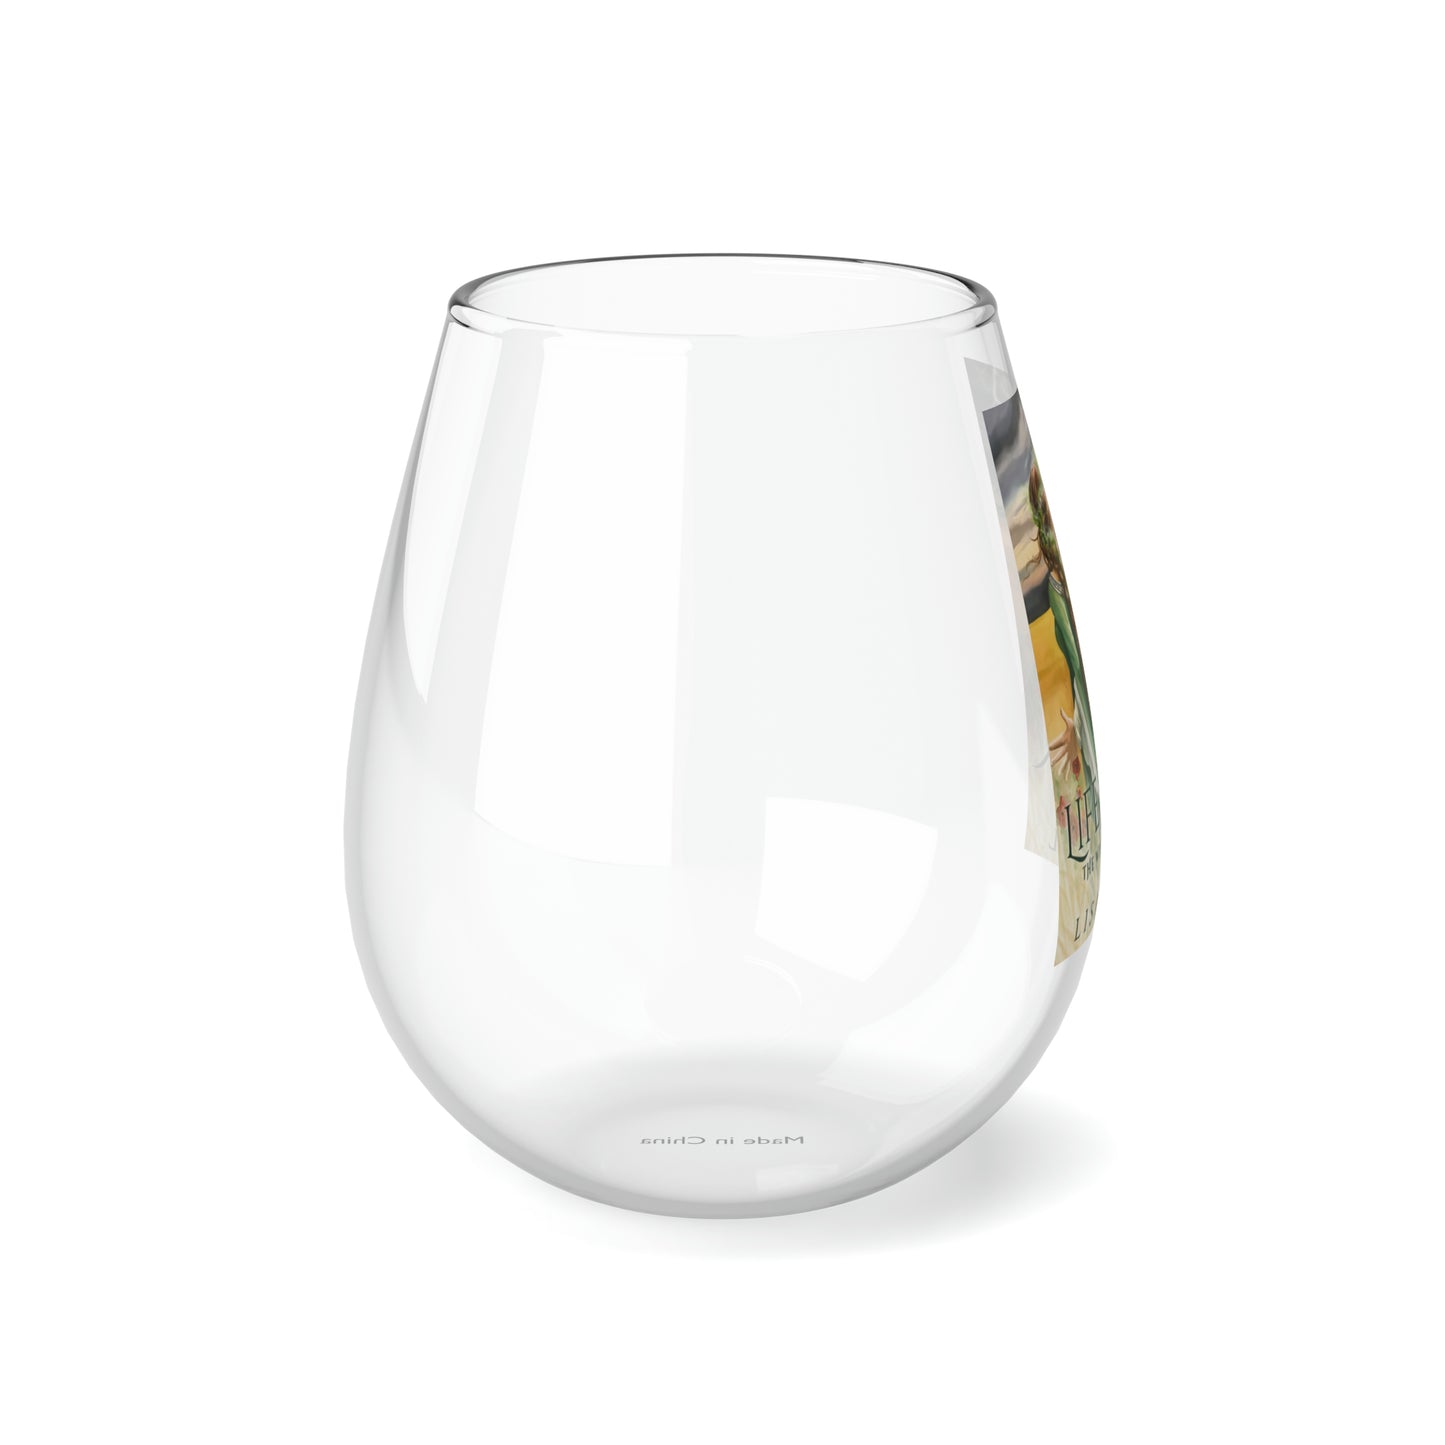 Life Giver - Stemless Wine Glass, 11.75oz